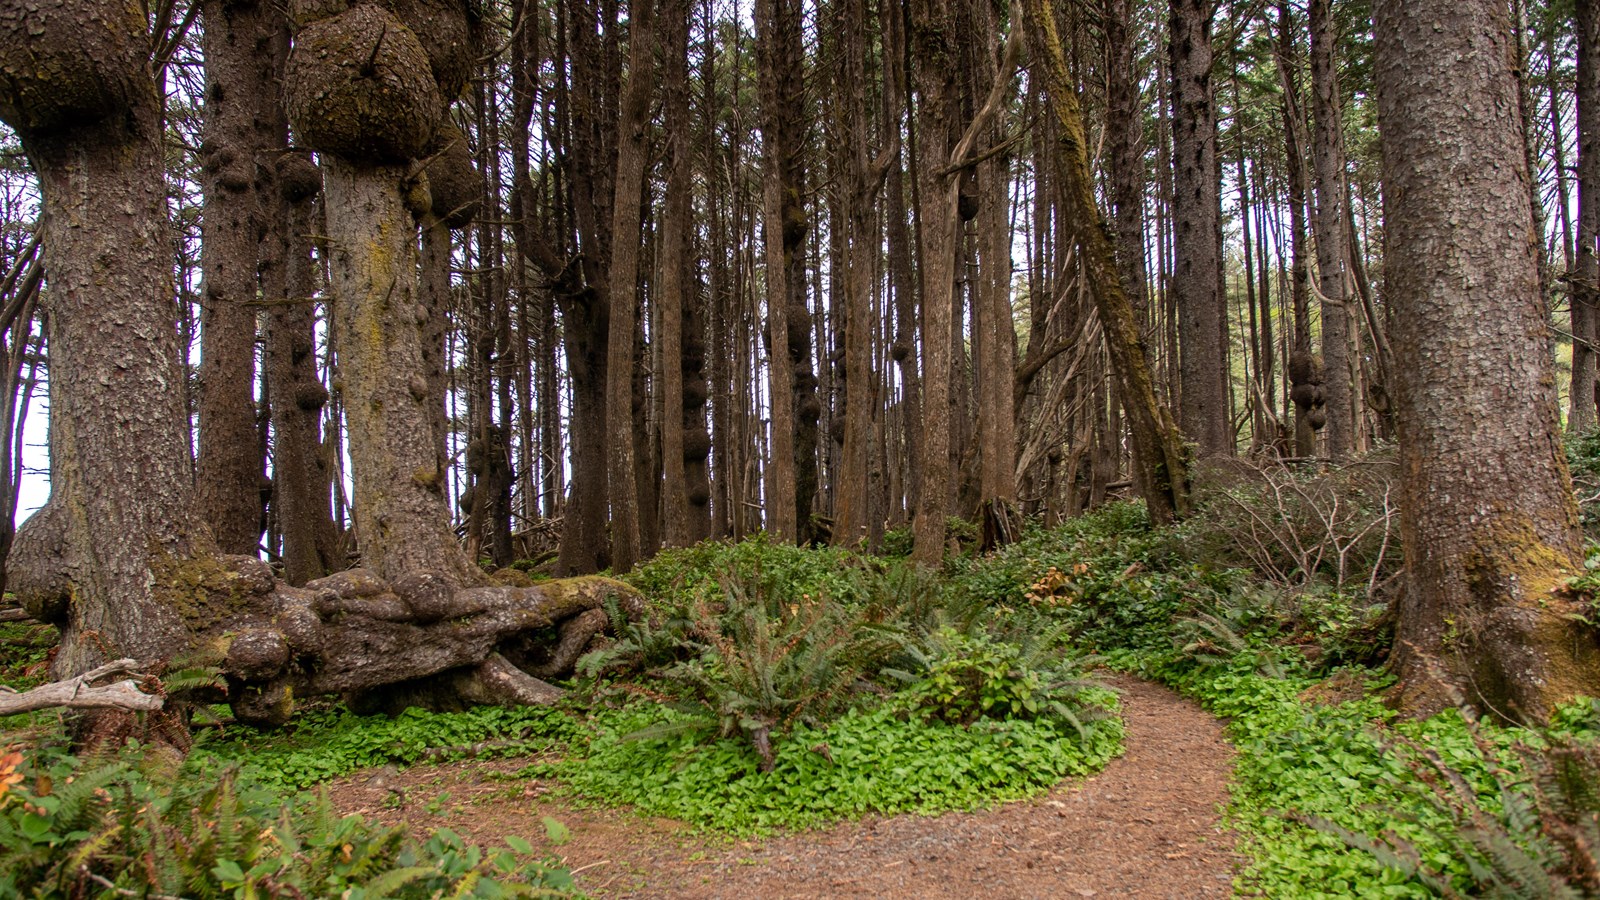 A trail through a forest. The trees have large round protrusions, or burls, in their bark.